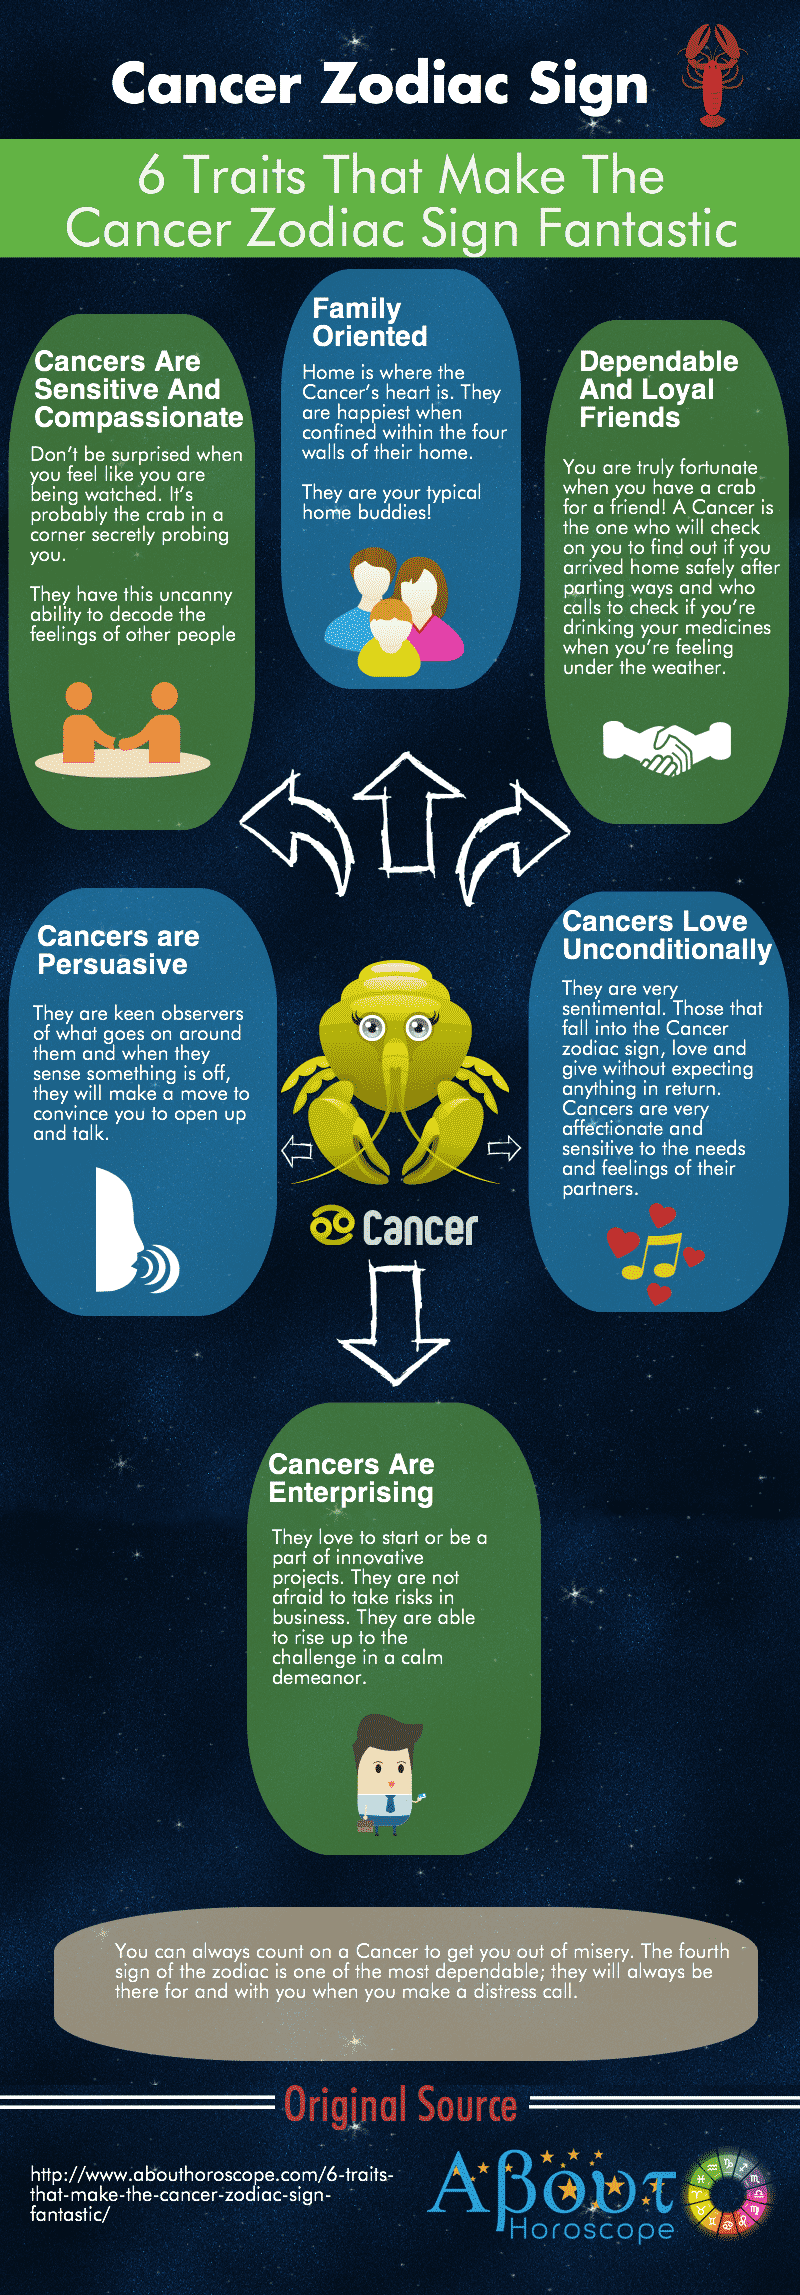 What Are Cancer Sign